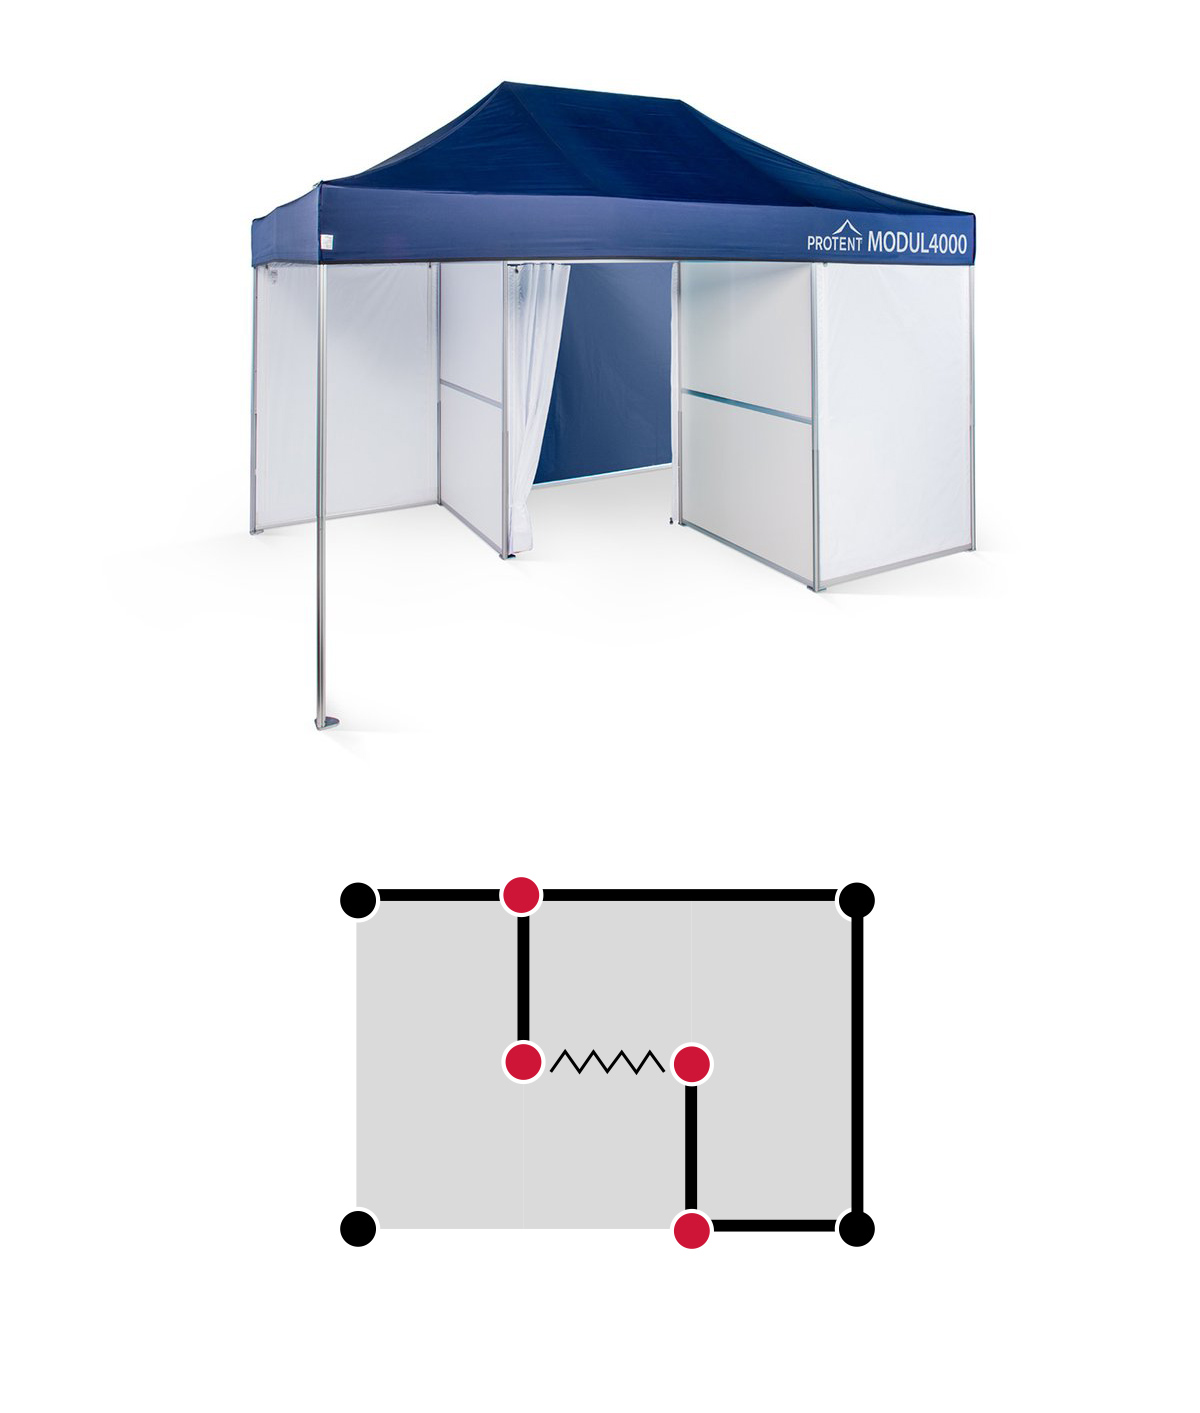 1. Room example: A unique folding tent system for every area of application